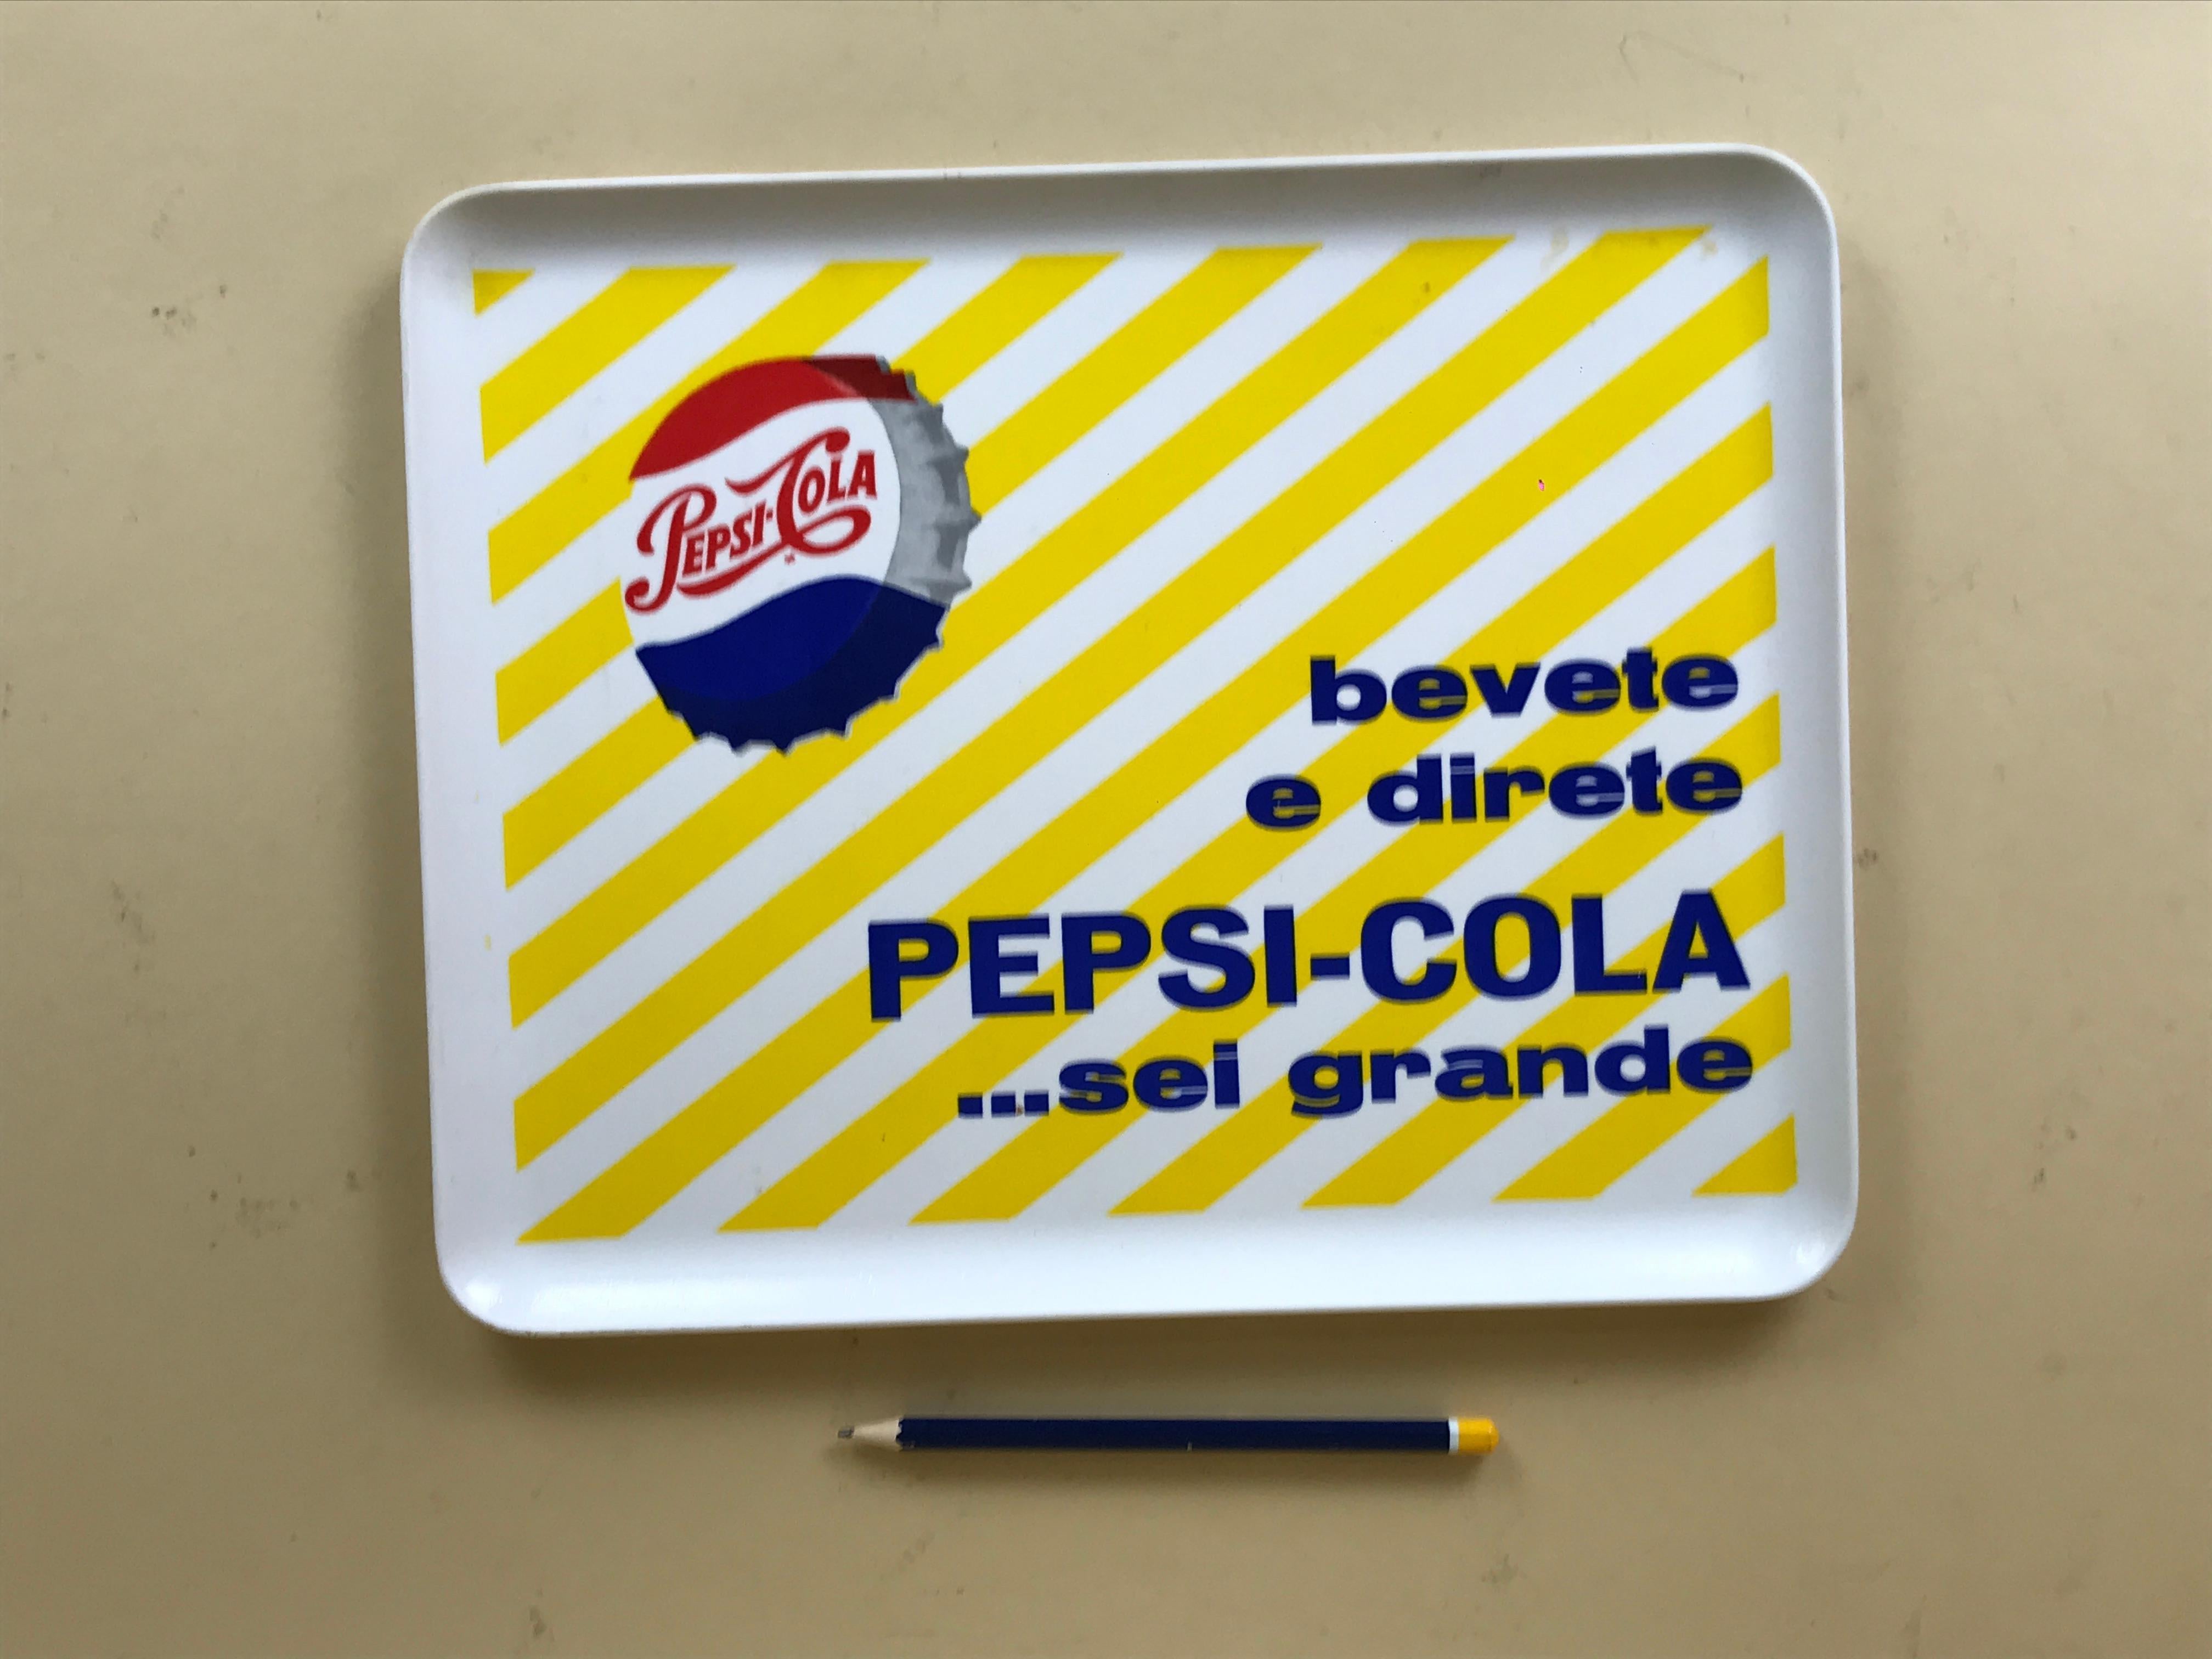 Vintage plastic Pepsi rectangular advertising bar tray made in Italy. The Pepsi corporate motto 